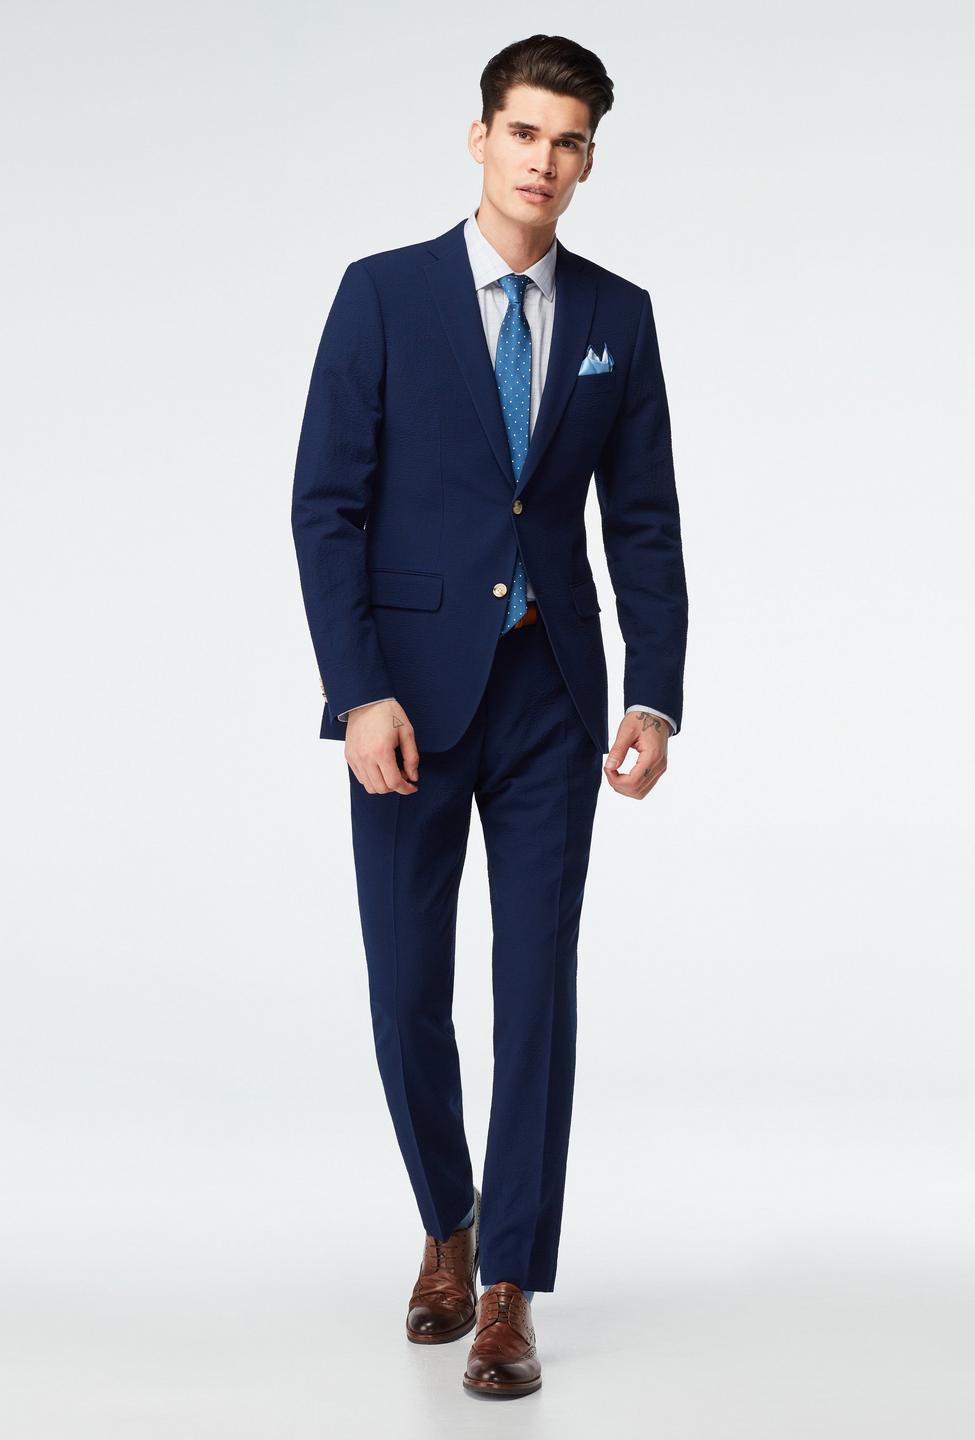 Navy suit - Stapleford Solid Design from Seasonal Indochino Collection